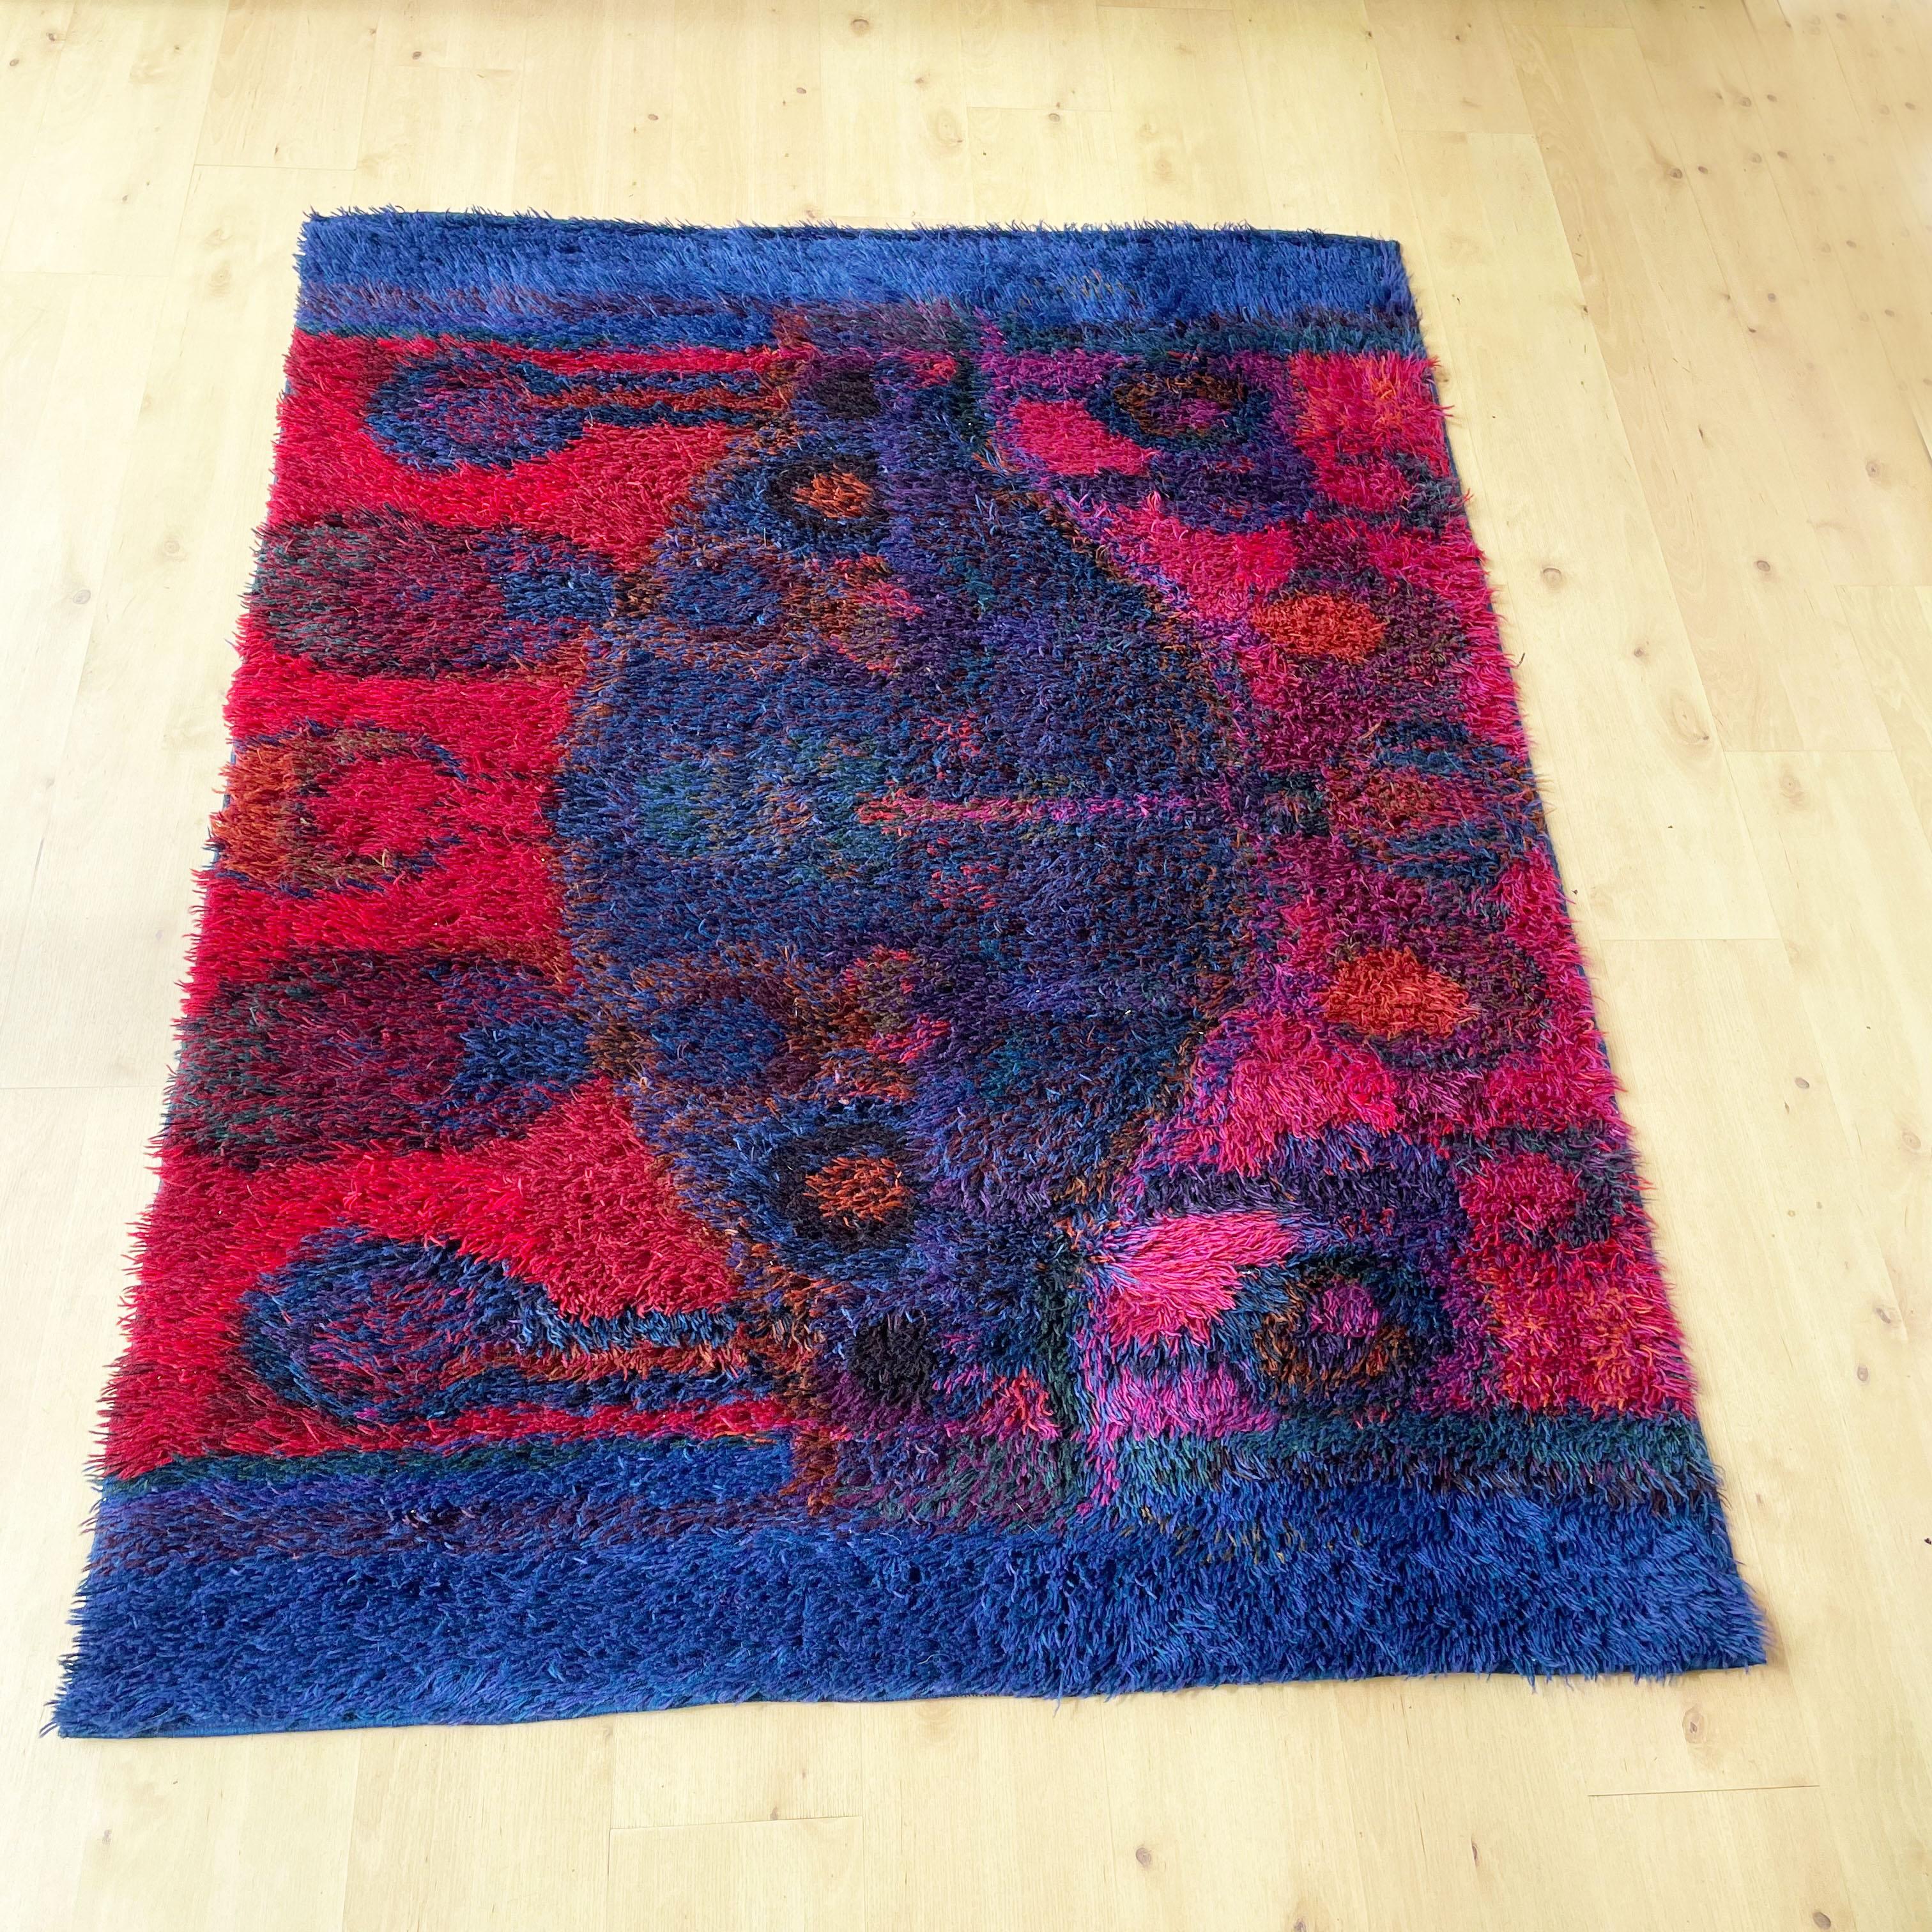 Article:

Original huge 1950s Rya rug



Producer:

Finnrya Oy AB, Finland





This rug is a great example of 1950s pop art interior. Made in high quality finish Rya handmade weaving technique. Made by Finnrya Oy AB in Finland in the